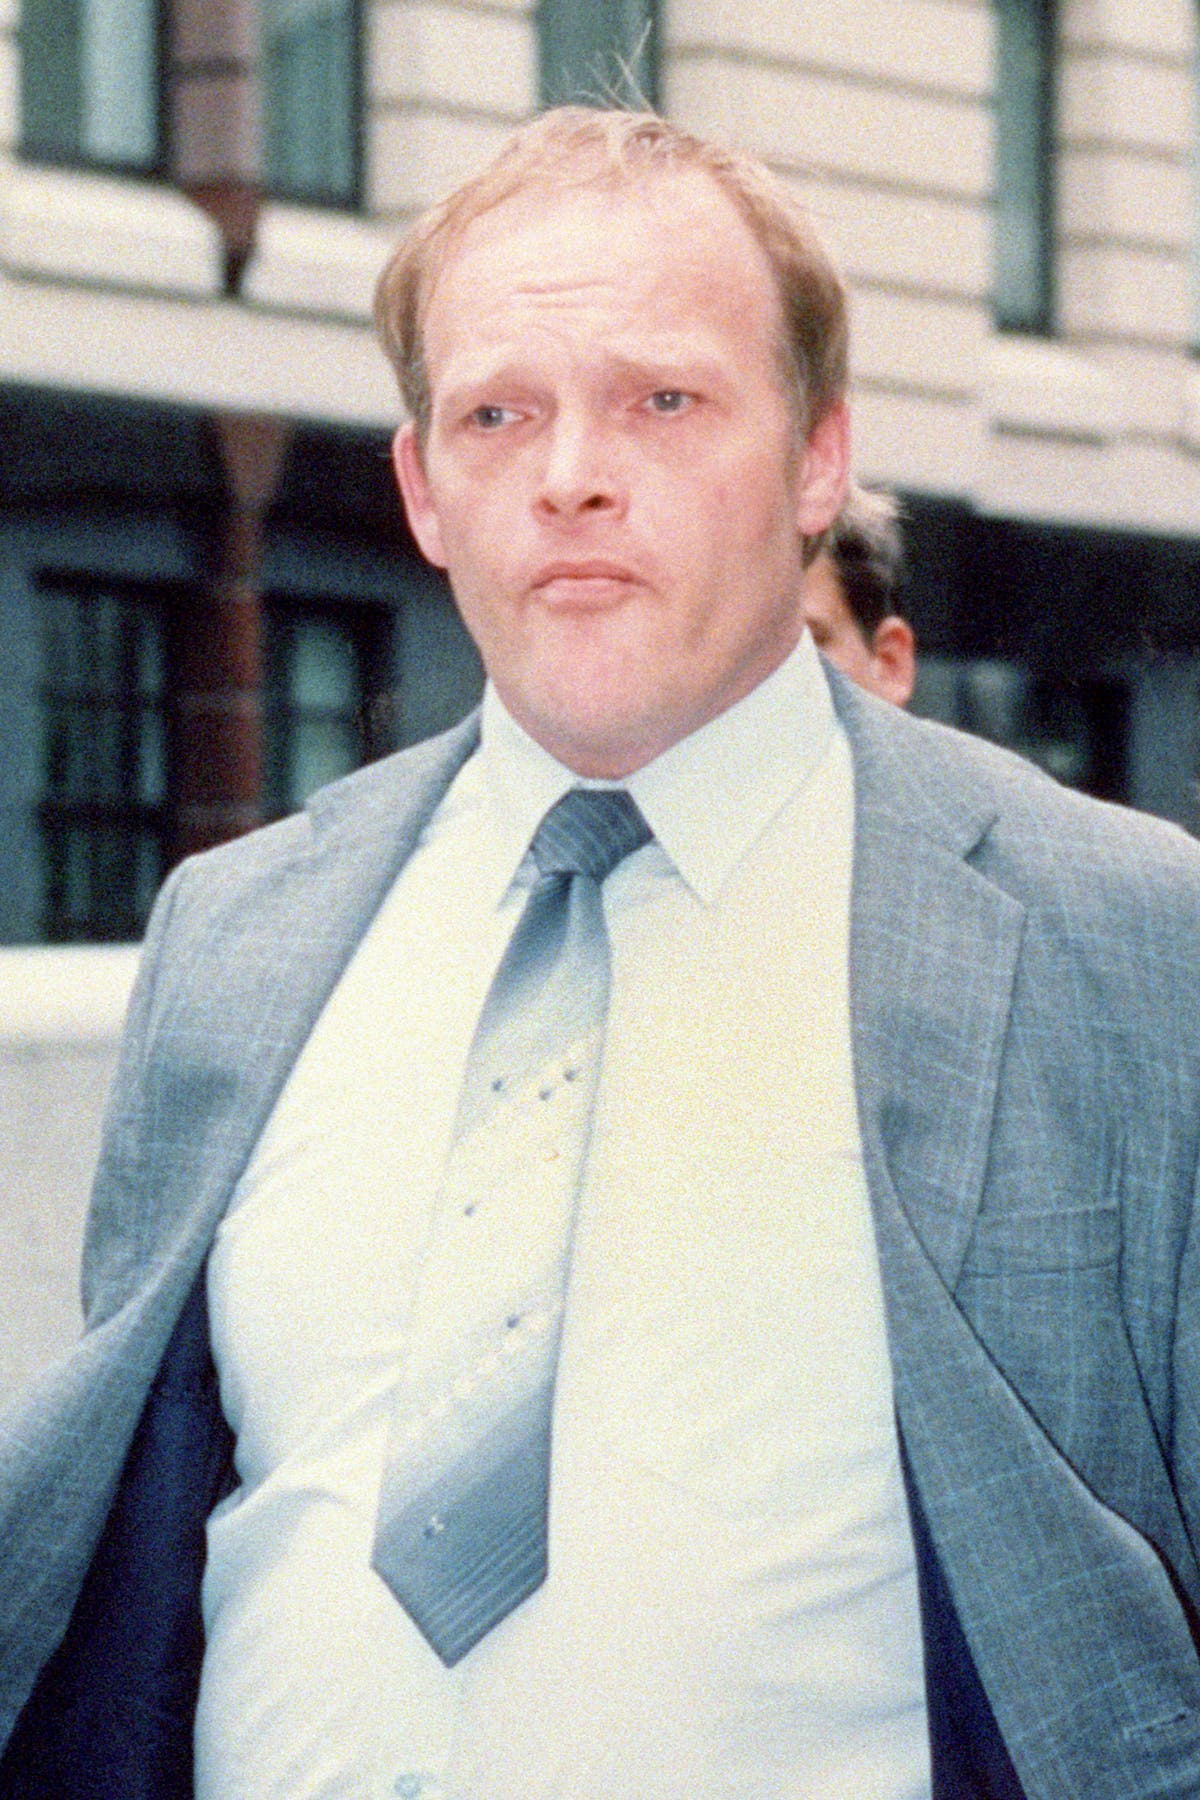 David Smith: 'Sadistic Sex Killer' Jailed For Murder 30 Years After Being Cleared Of The Crime